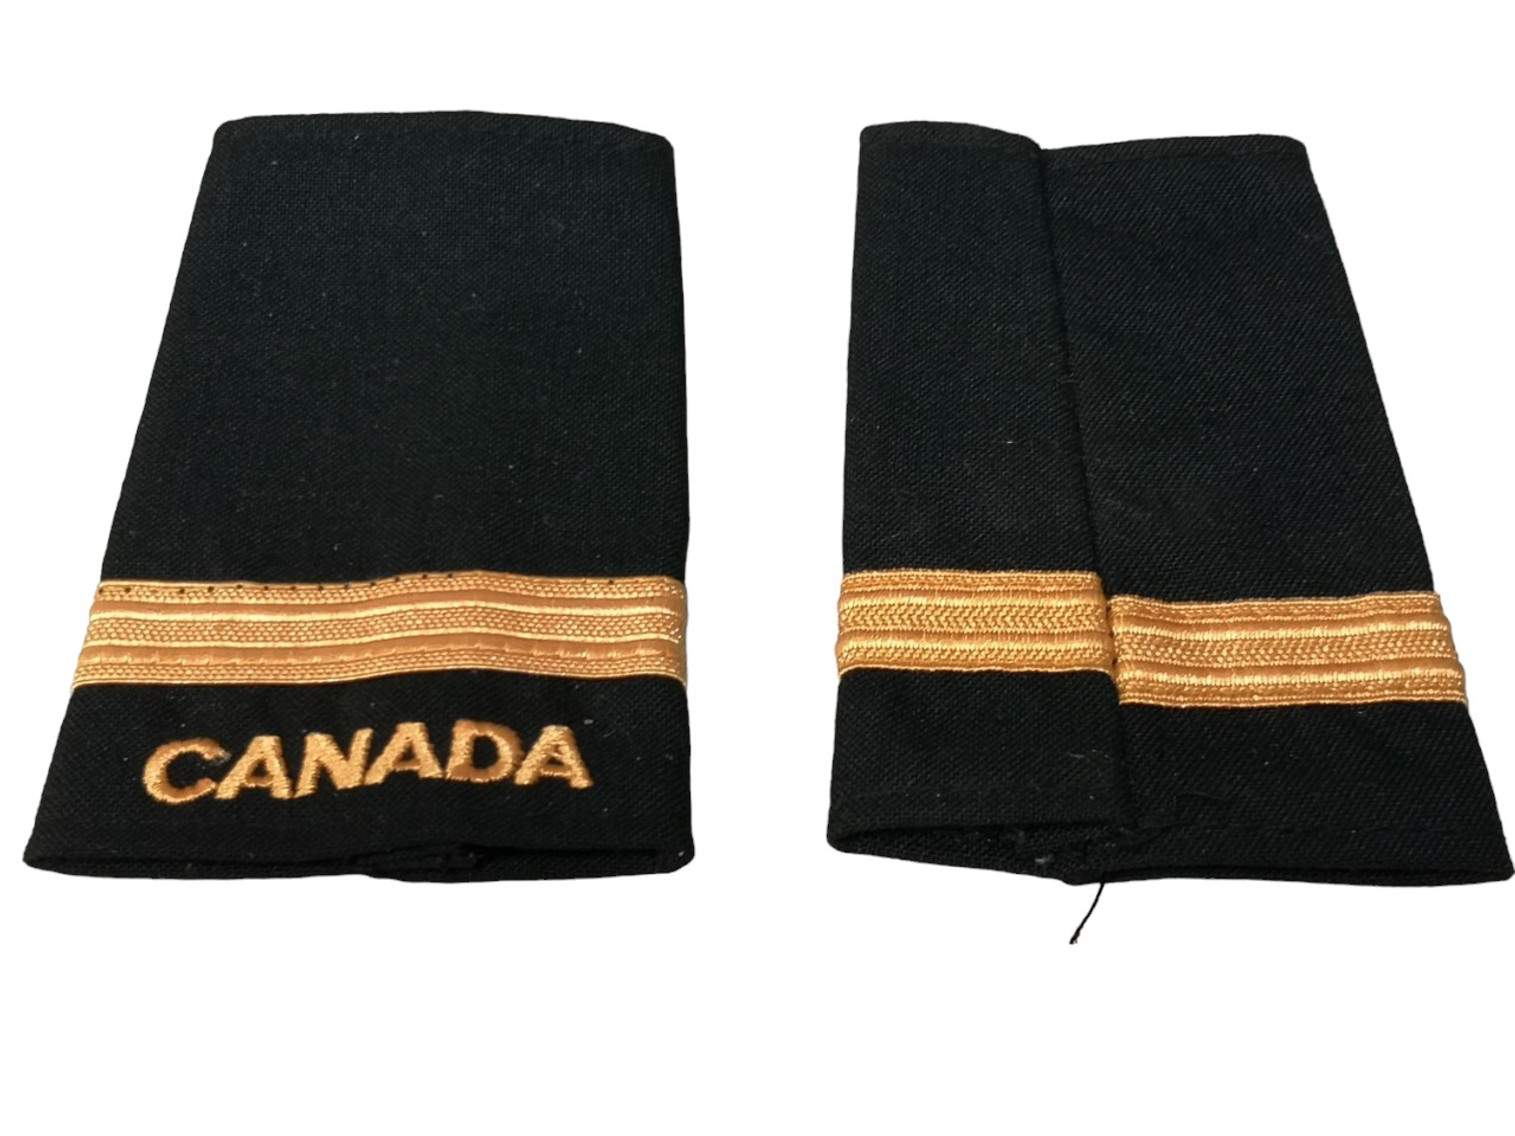 Canadian Armed Forces Rank Epaulets Navy - Acting Sub-Lieutenant